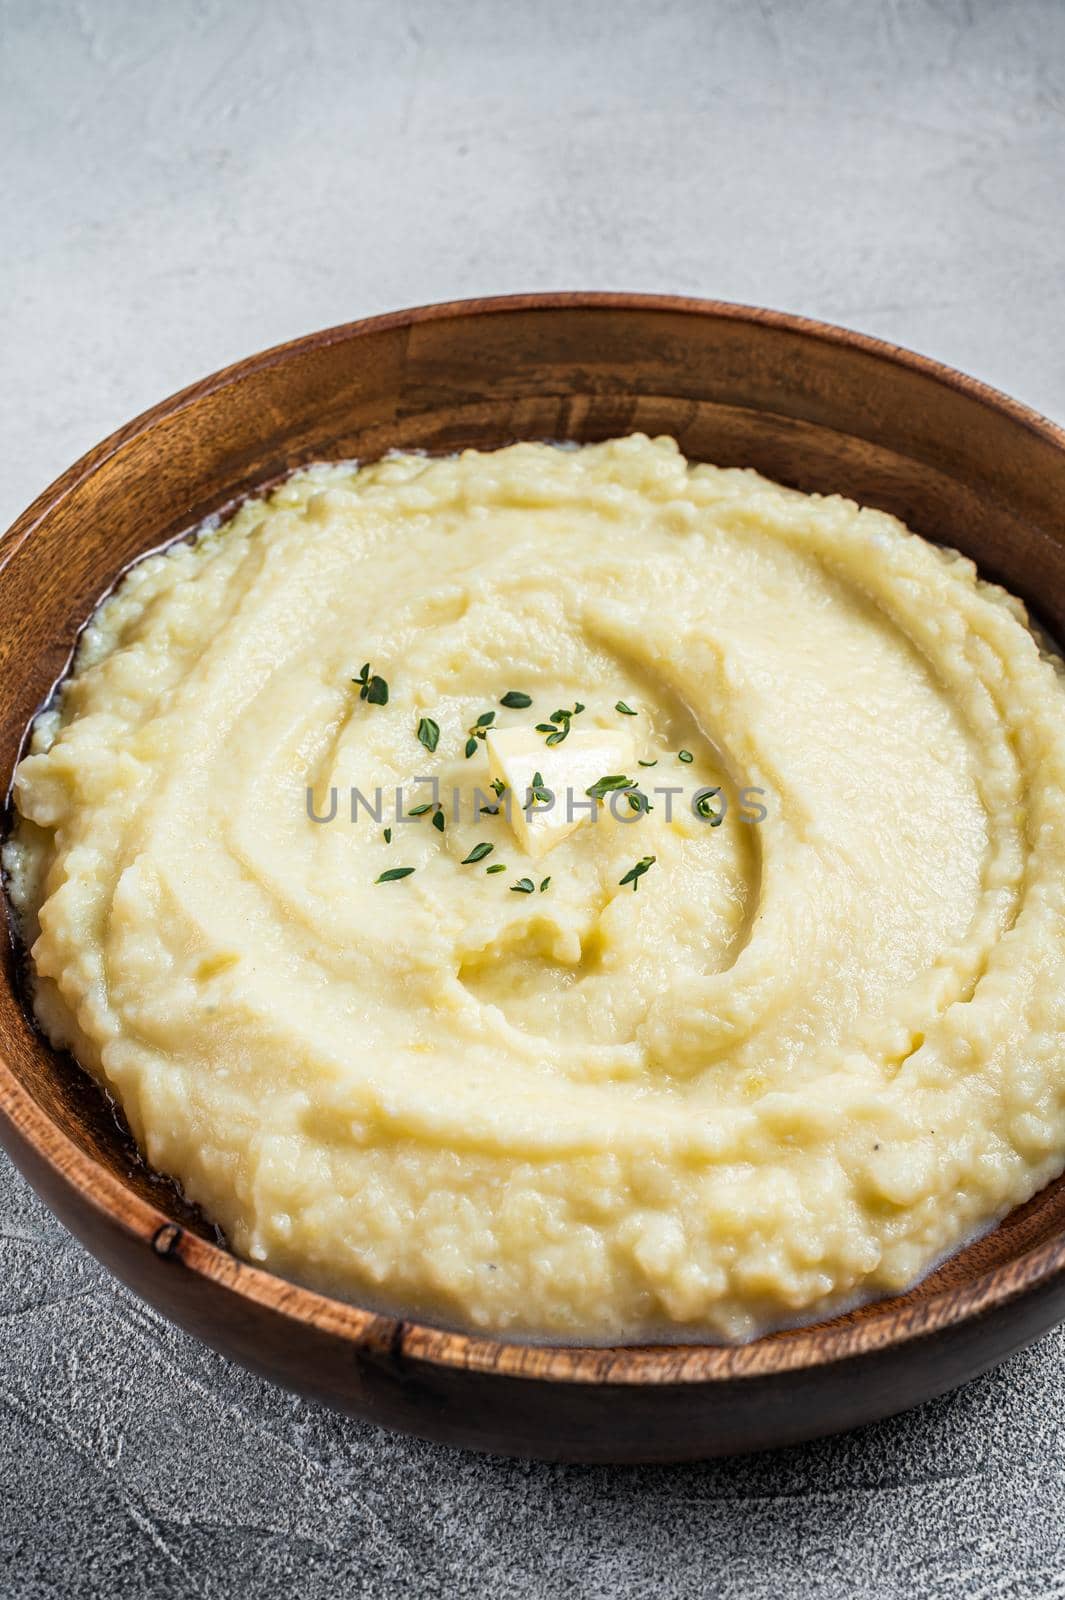 Boiled potato puree, Mashed potatoes in a wooden plate. White background. Top view.